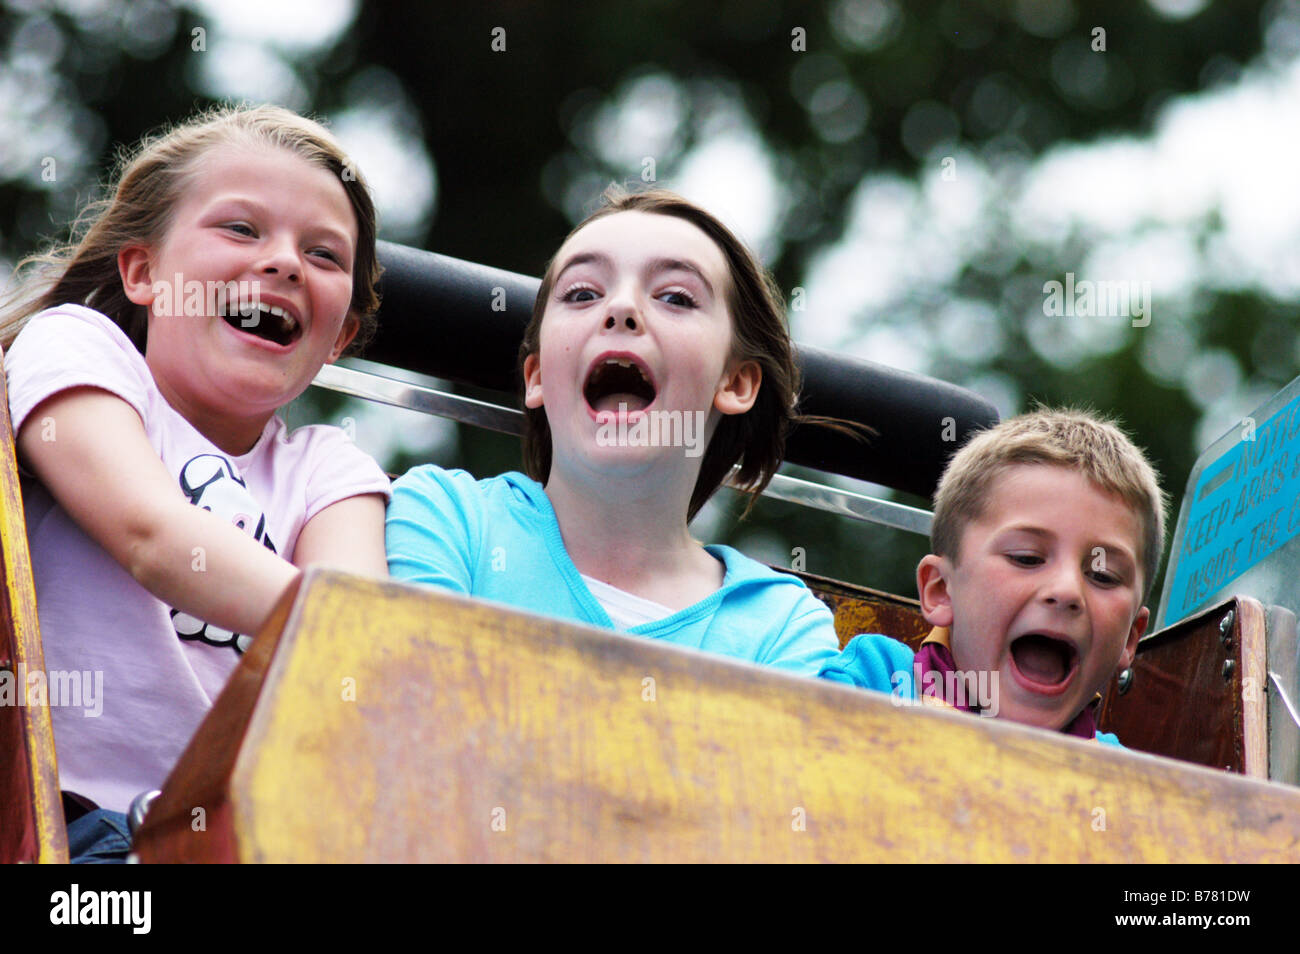 Children scream while riding on a fairground ride North Yorkshire, Model released Stock Photo